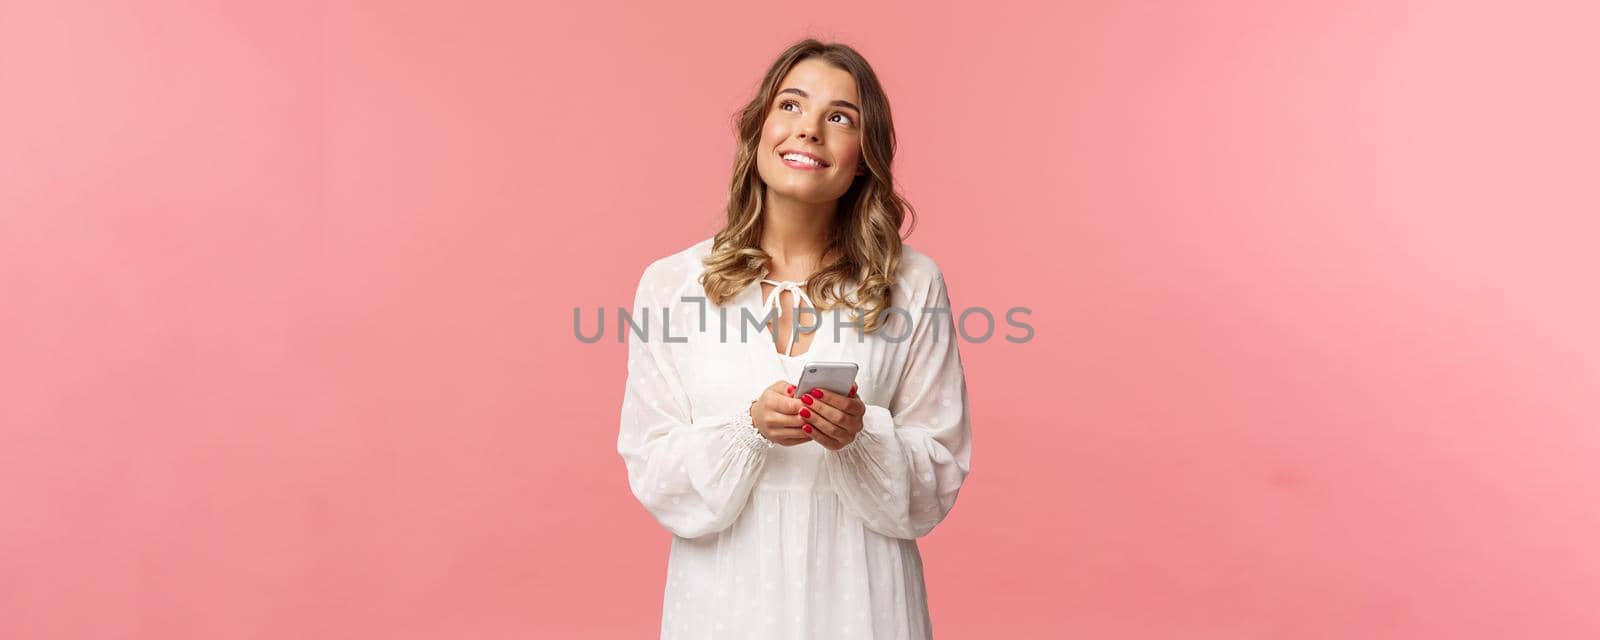 Portrait of dreamy young pretty blond girl fantasizing about something beautiful, looking up thoughtful and happy smiling, holding mobile phone, messaging, shopping online, pink background.